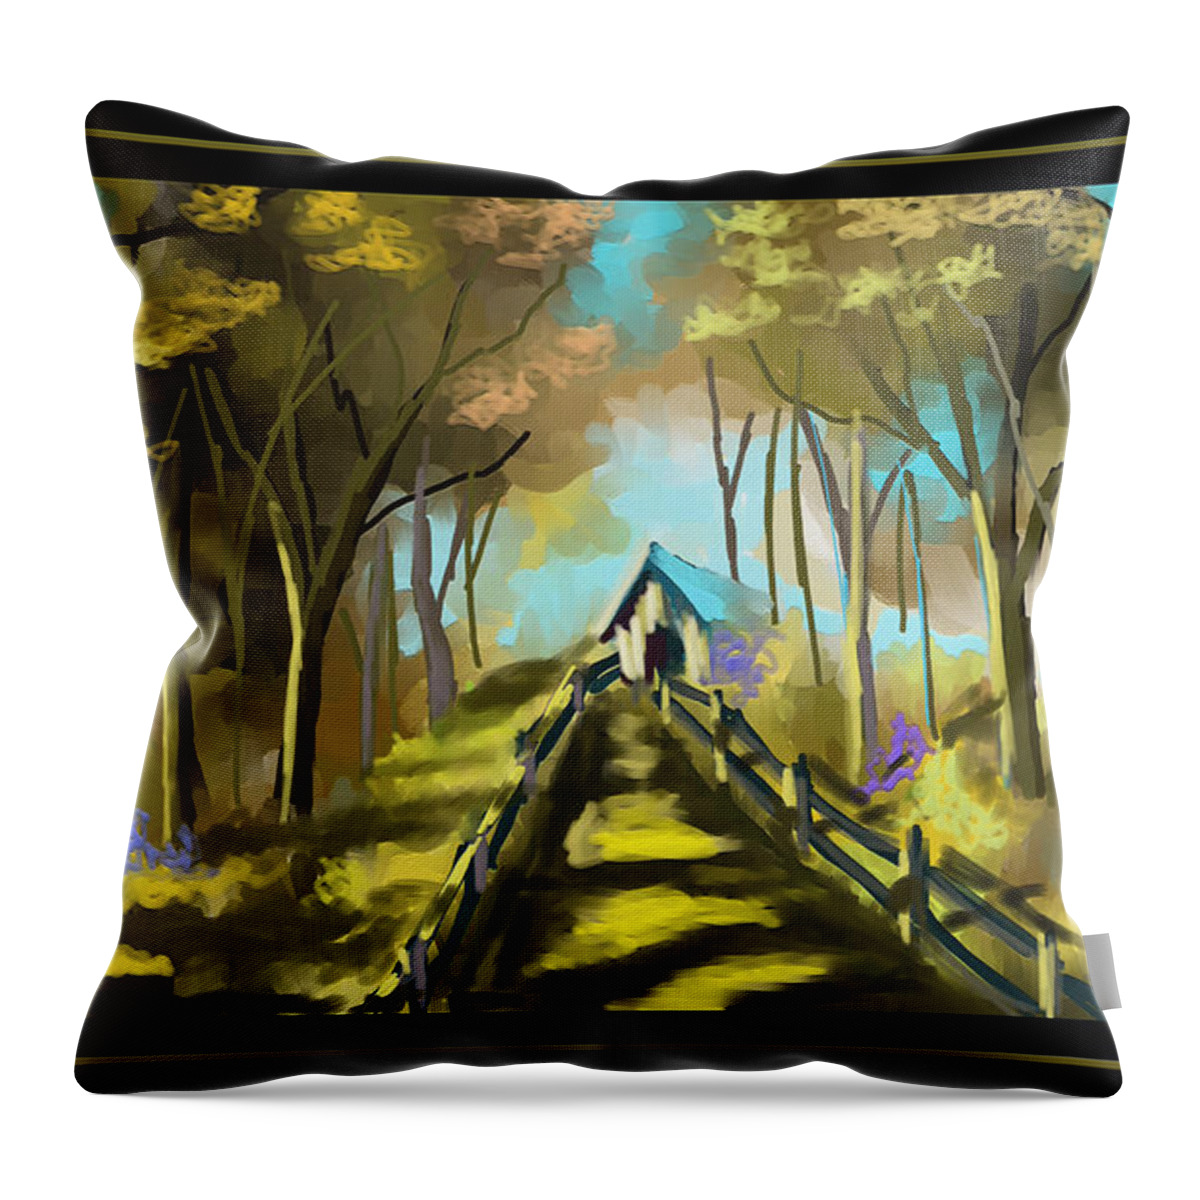 Trees Throw Pillow featuring the painting A Thought Of Mine by Steven Lebron Langston